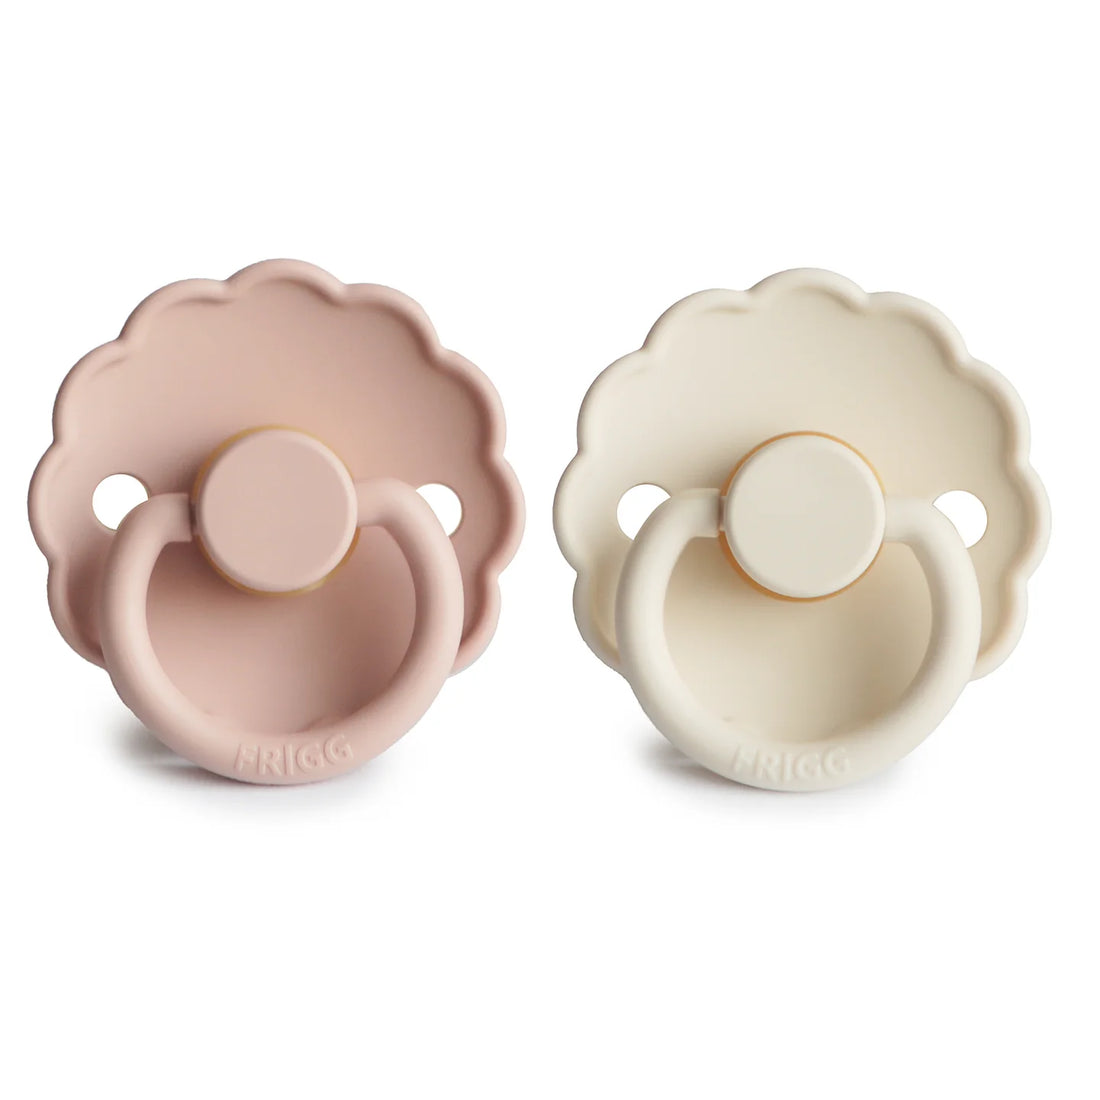 FRIGG DAISY NATURAL RUBBER PACIFIER | BLUSH/CREAM | 2 PACK